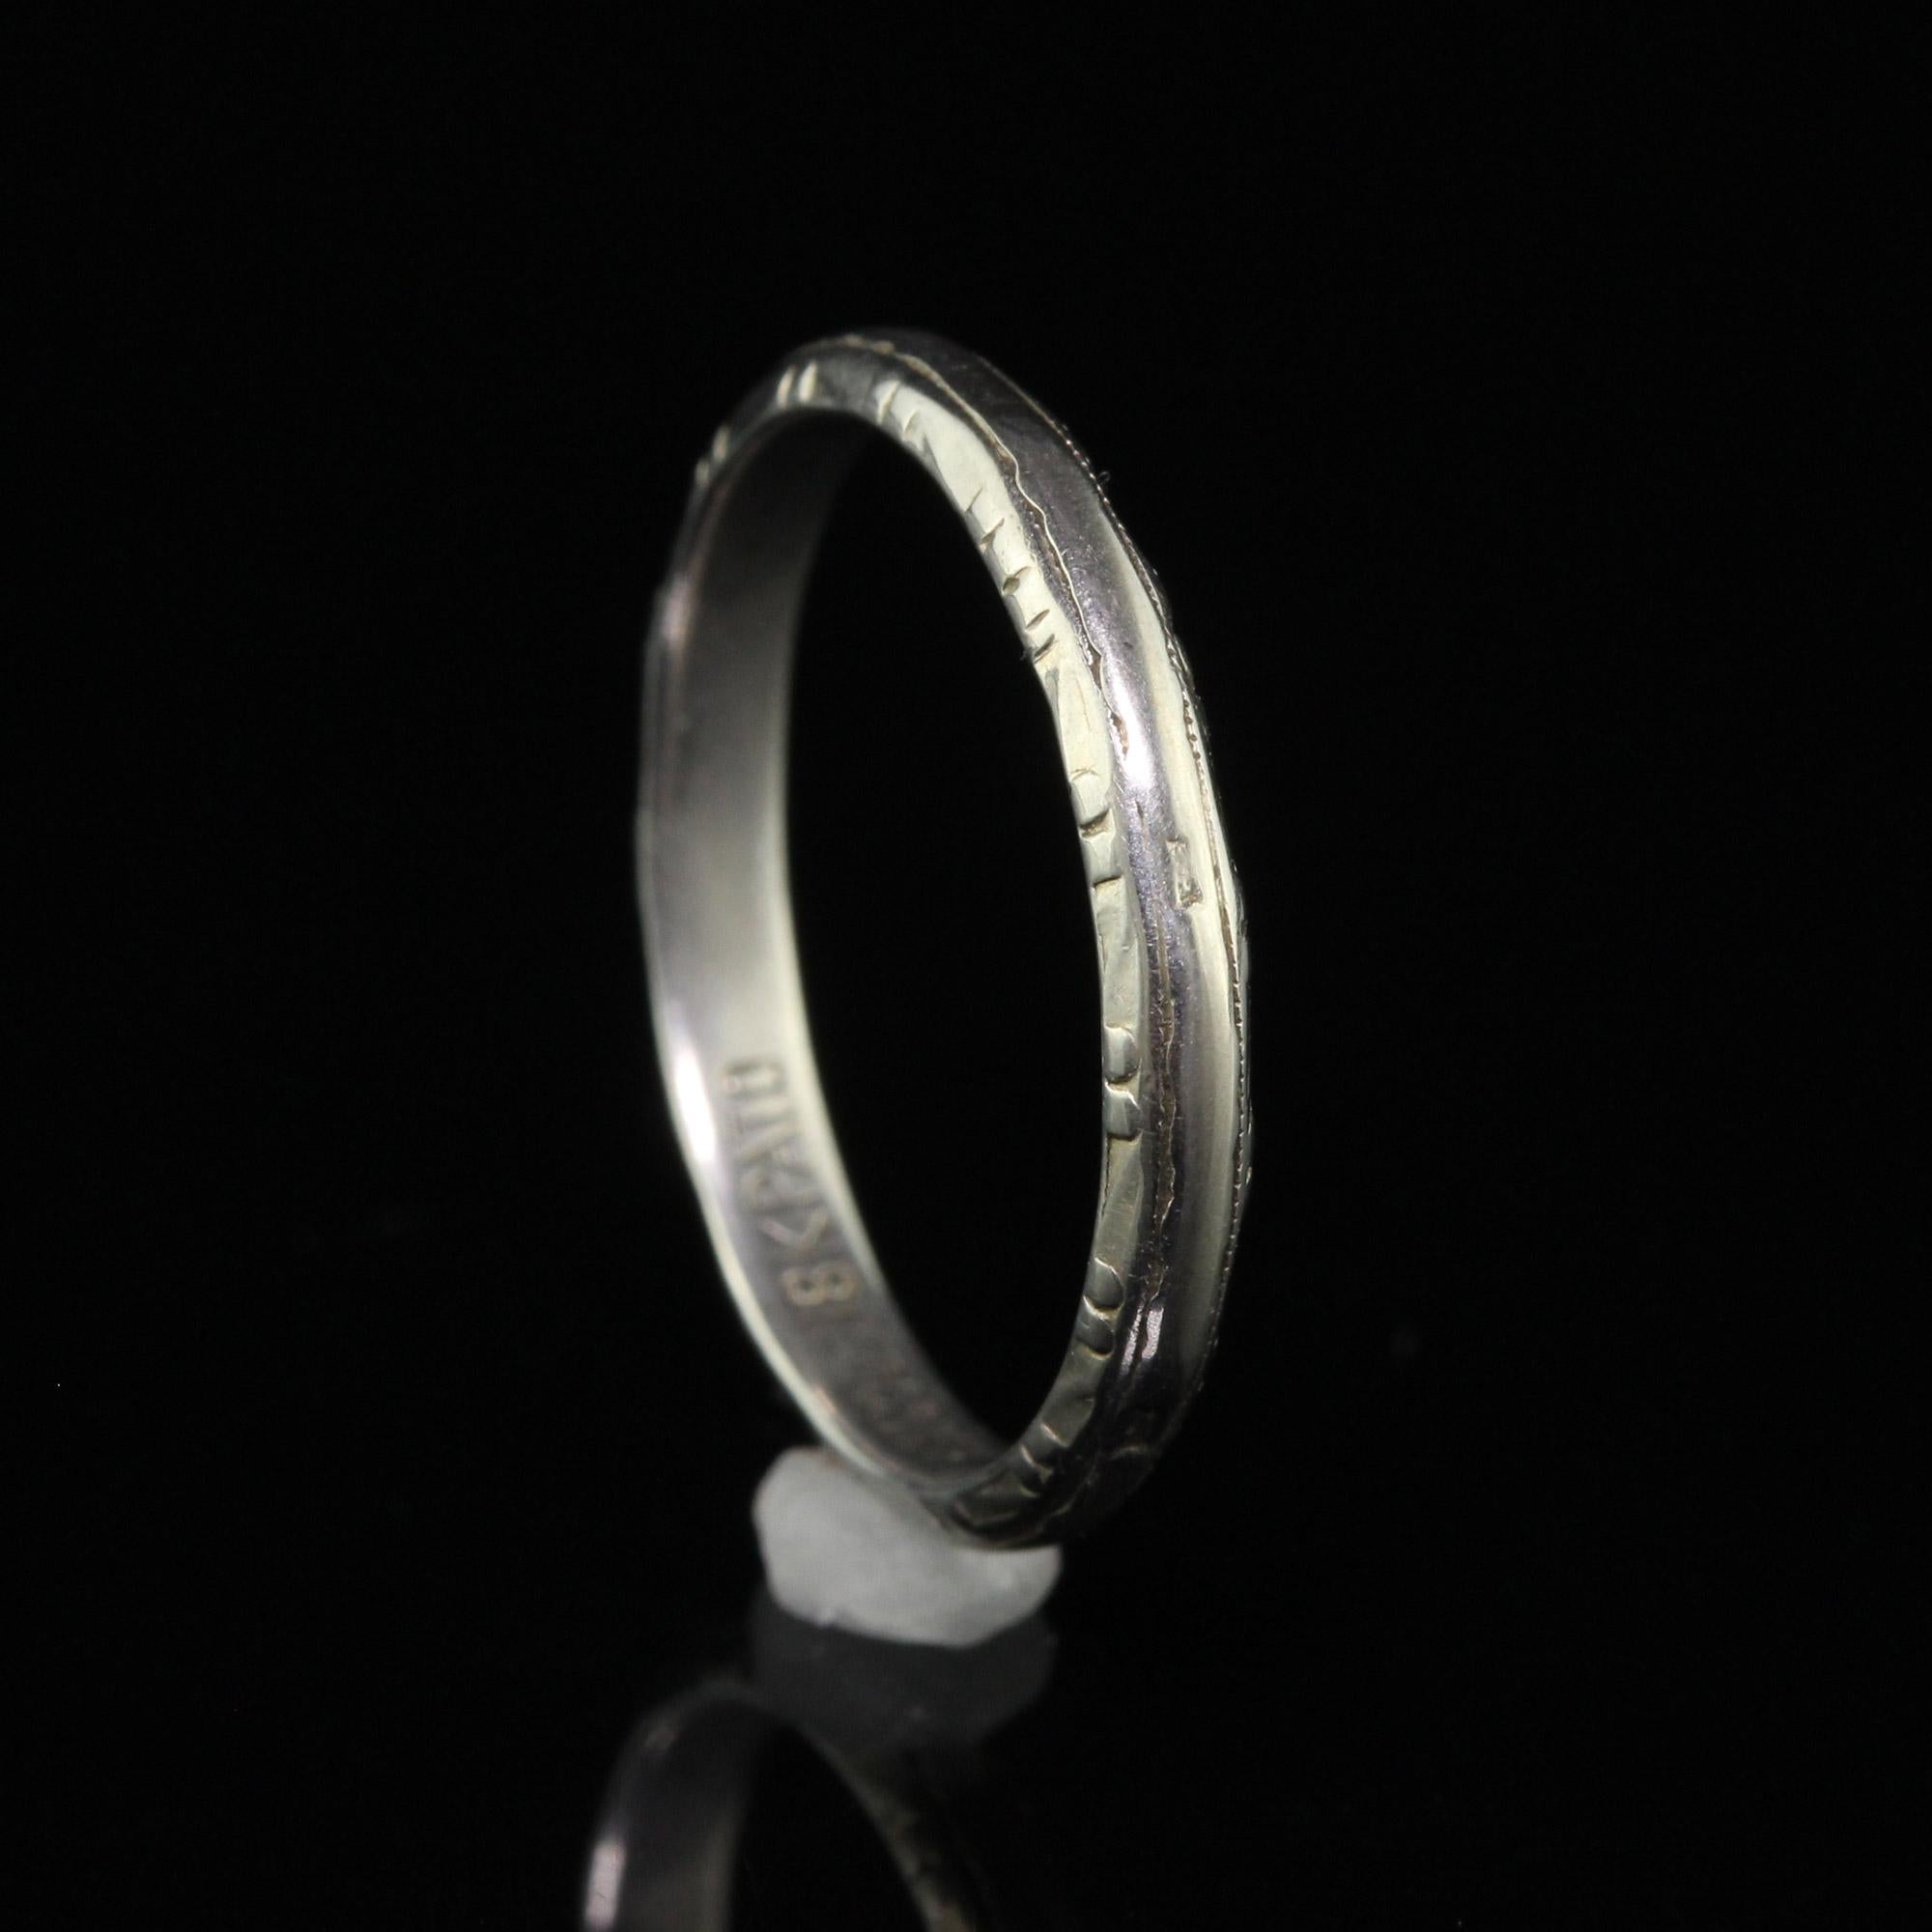 Antique Art Deco 18K White Gold Classic Engraved Wedding Band - Size 6 For Sale 1